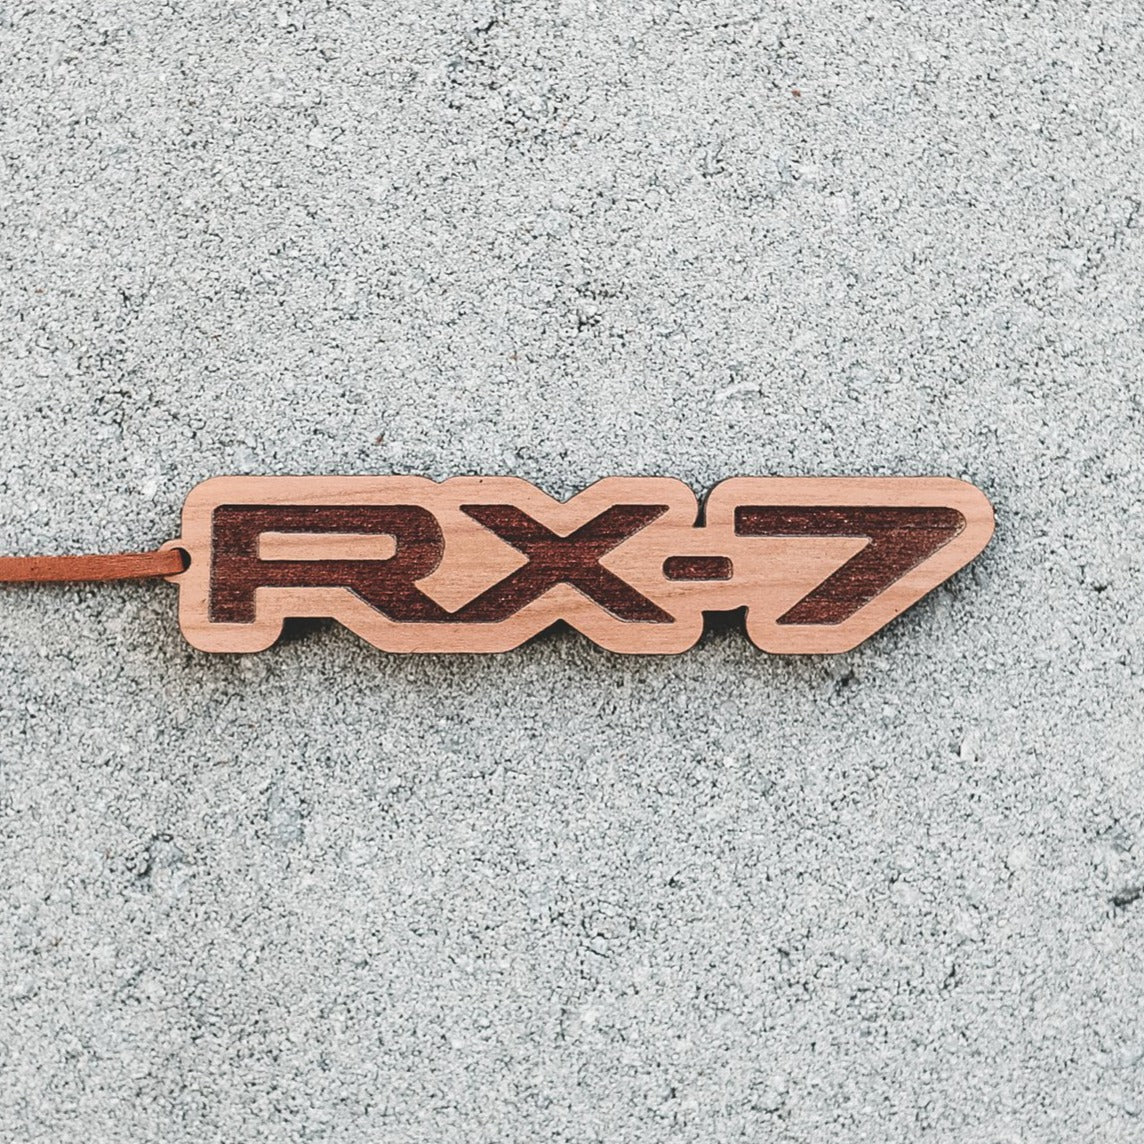 Frshslabs Re-Scentable Wooden Air Freshener (RX-7)